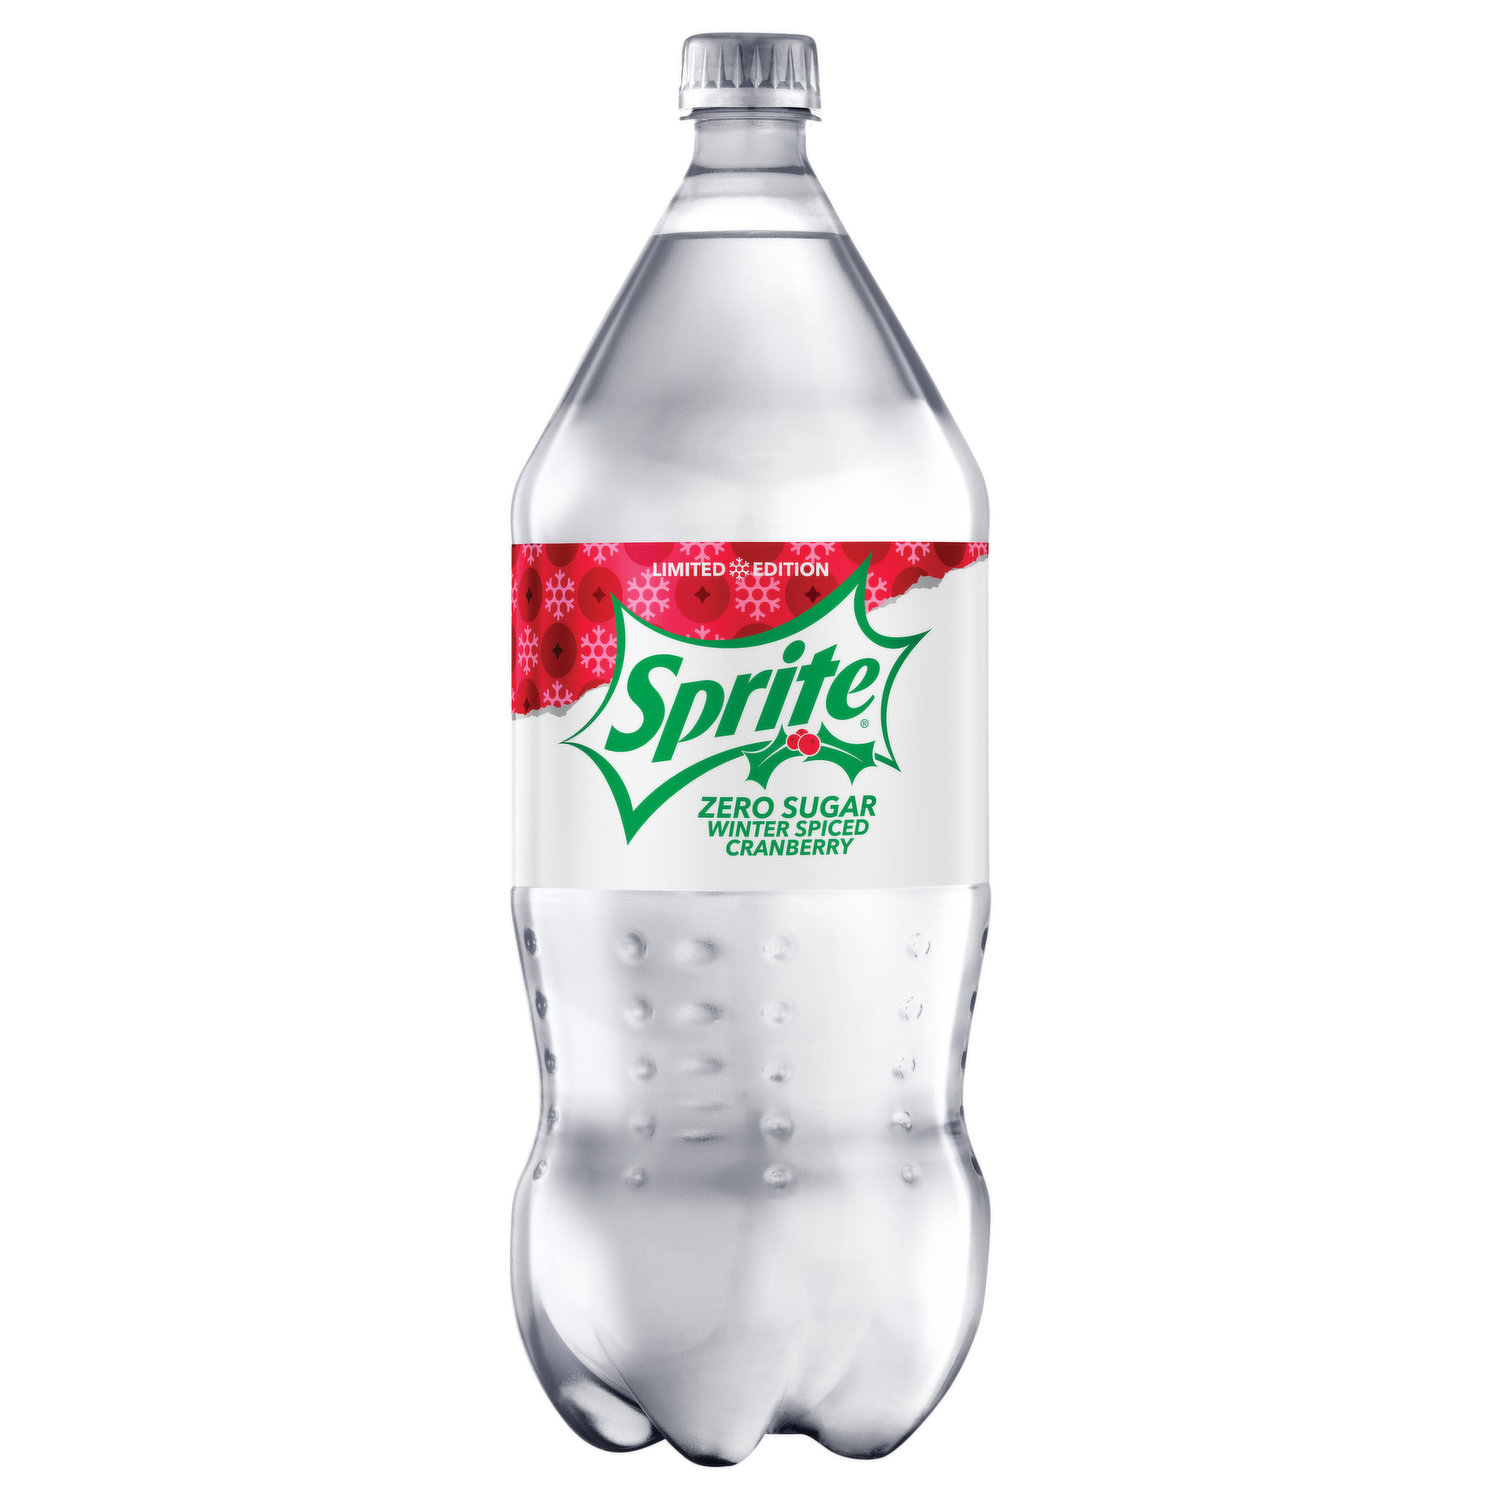 We see you @sprite Zero Sugar. Staying cool as always.  #TotalBeverageCompany